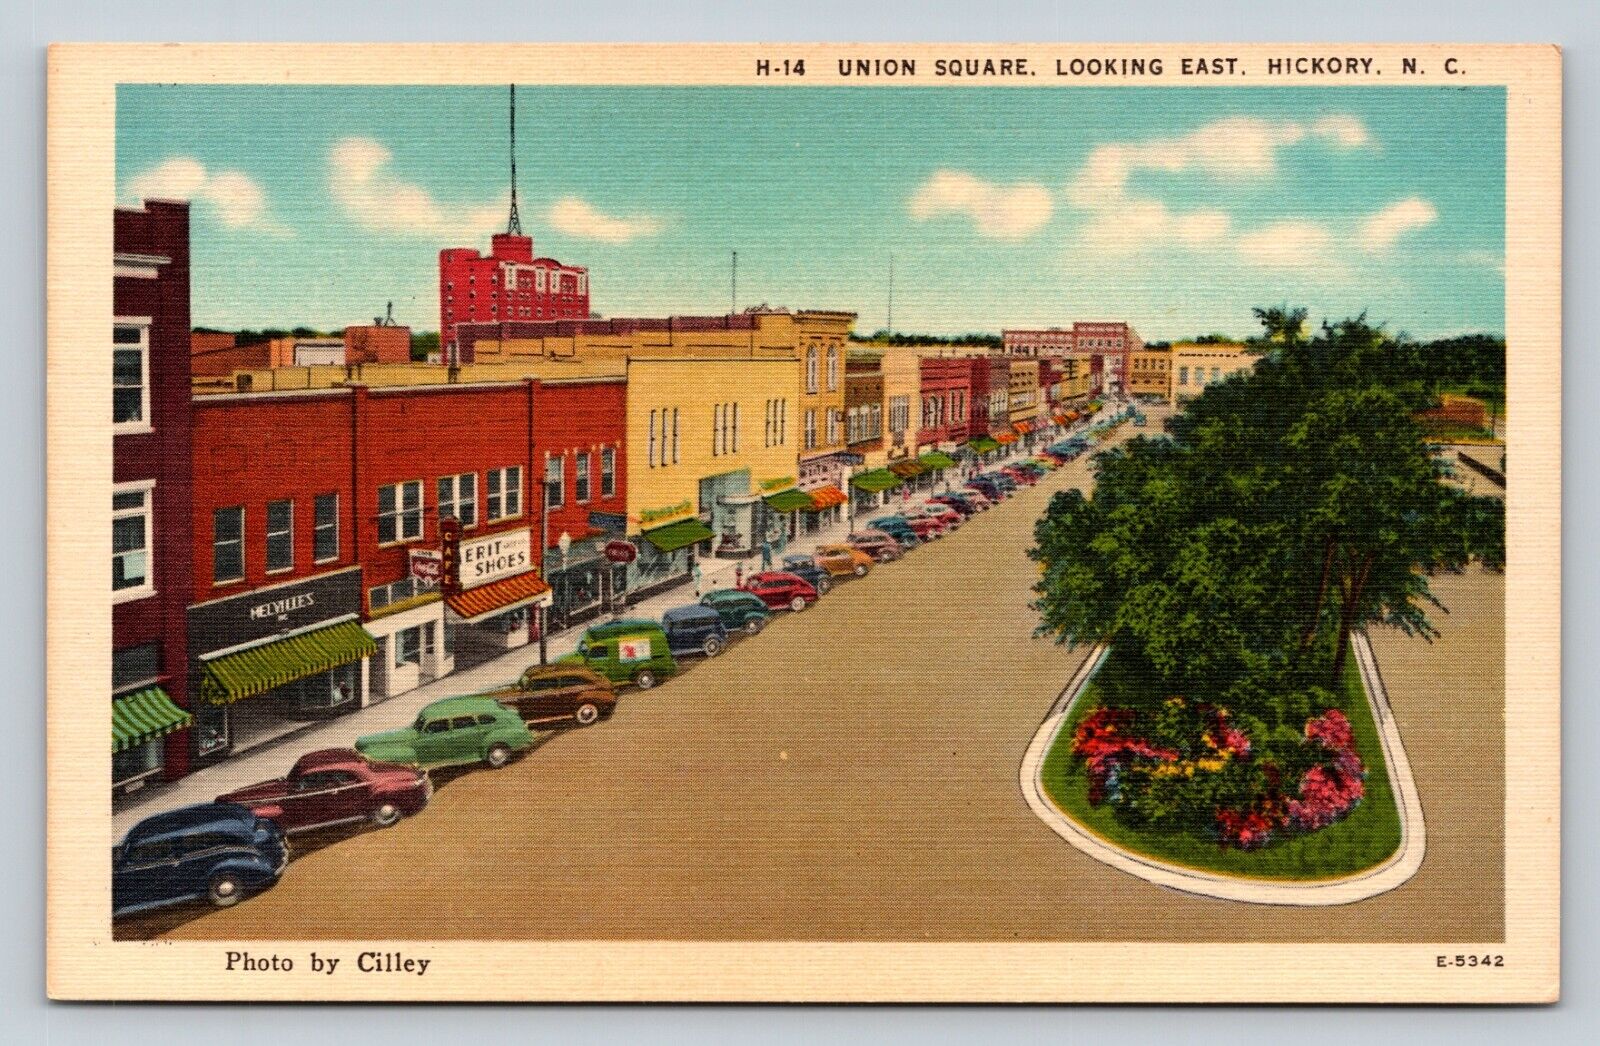 Hickory North Carolina NC Union Square Photo by Cilley VINTAGE Postcard